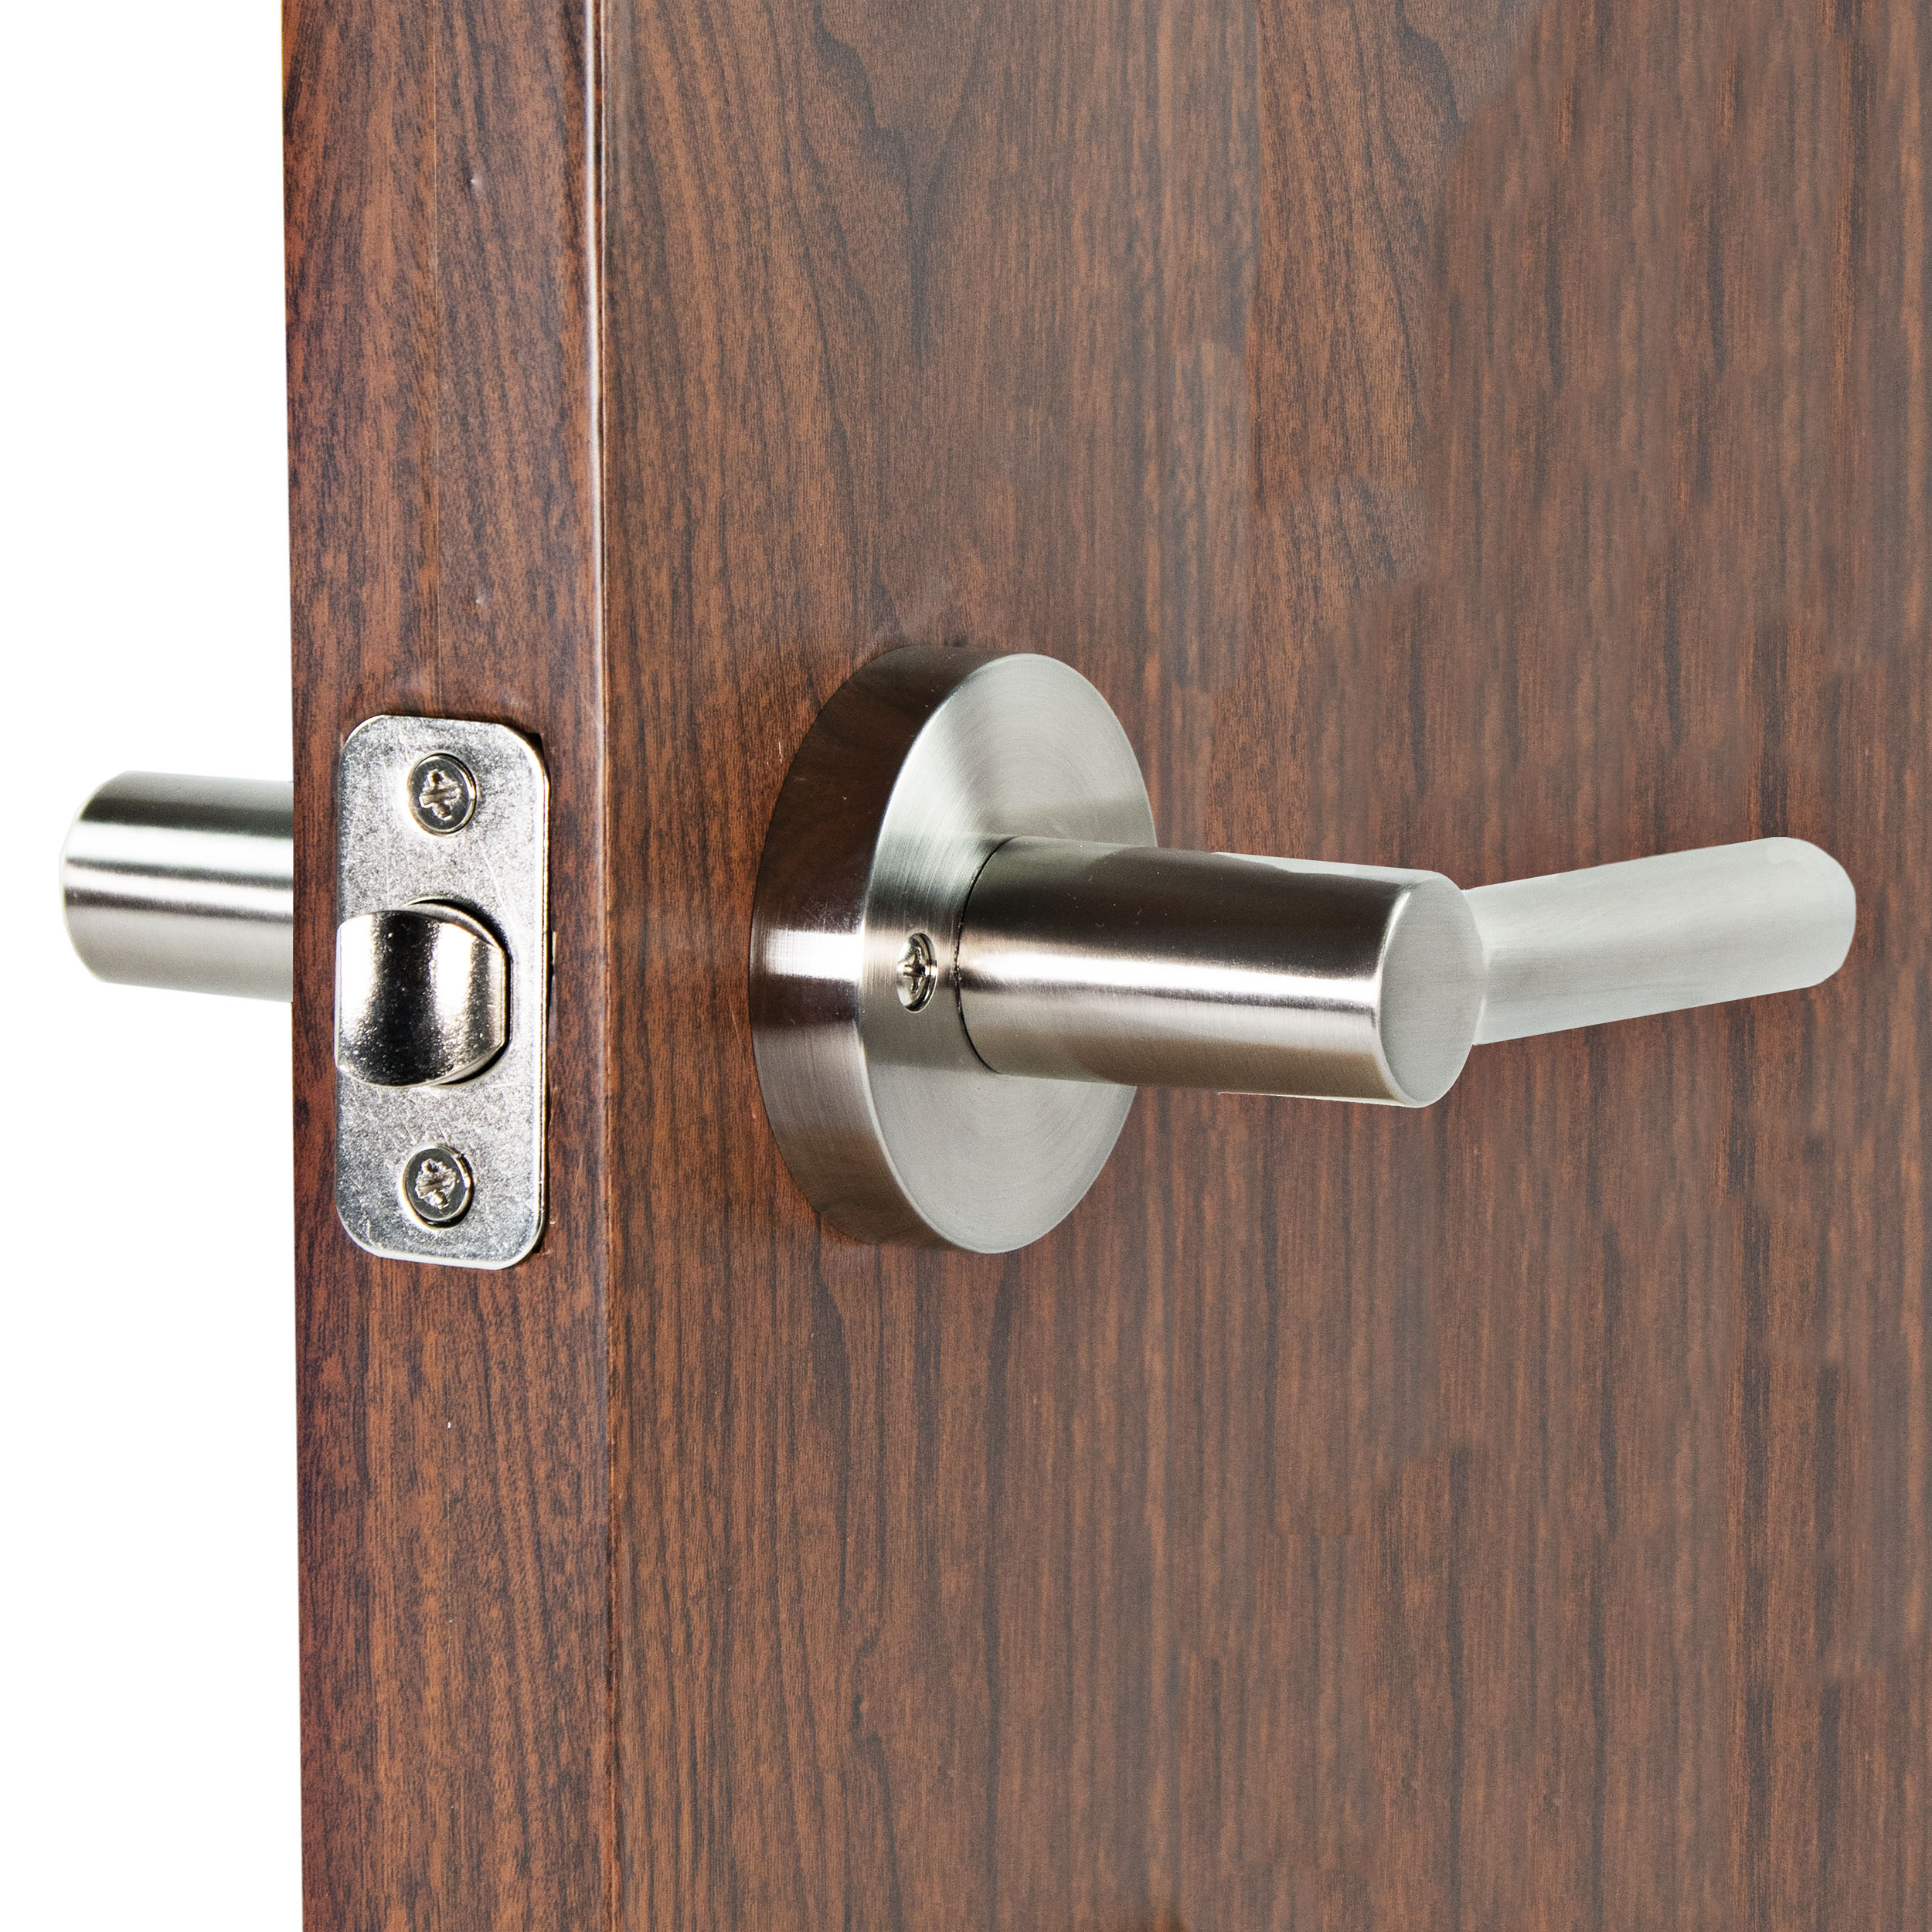 Ultra Security Windsor Hall/Closet Passage Round Rod Door Lever- Passage Lock Lever, Hall and Closet Lever (Satin Nickel, 1 Pack) - image 5 of 11